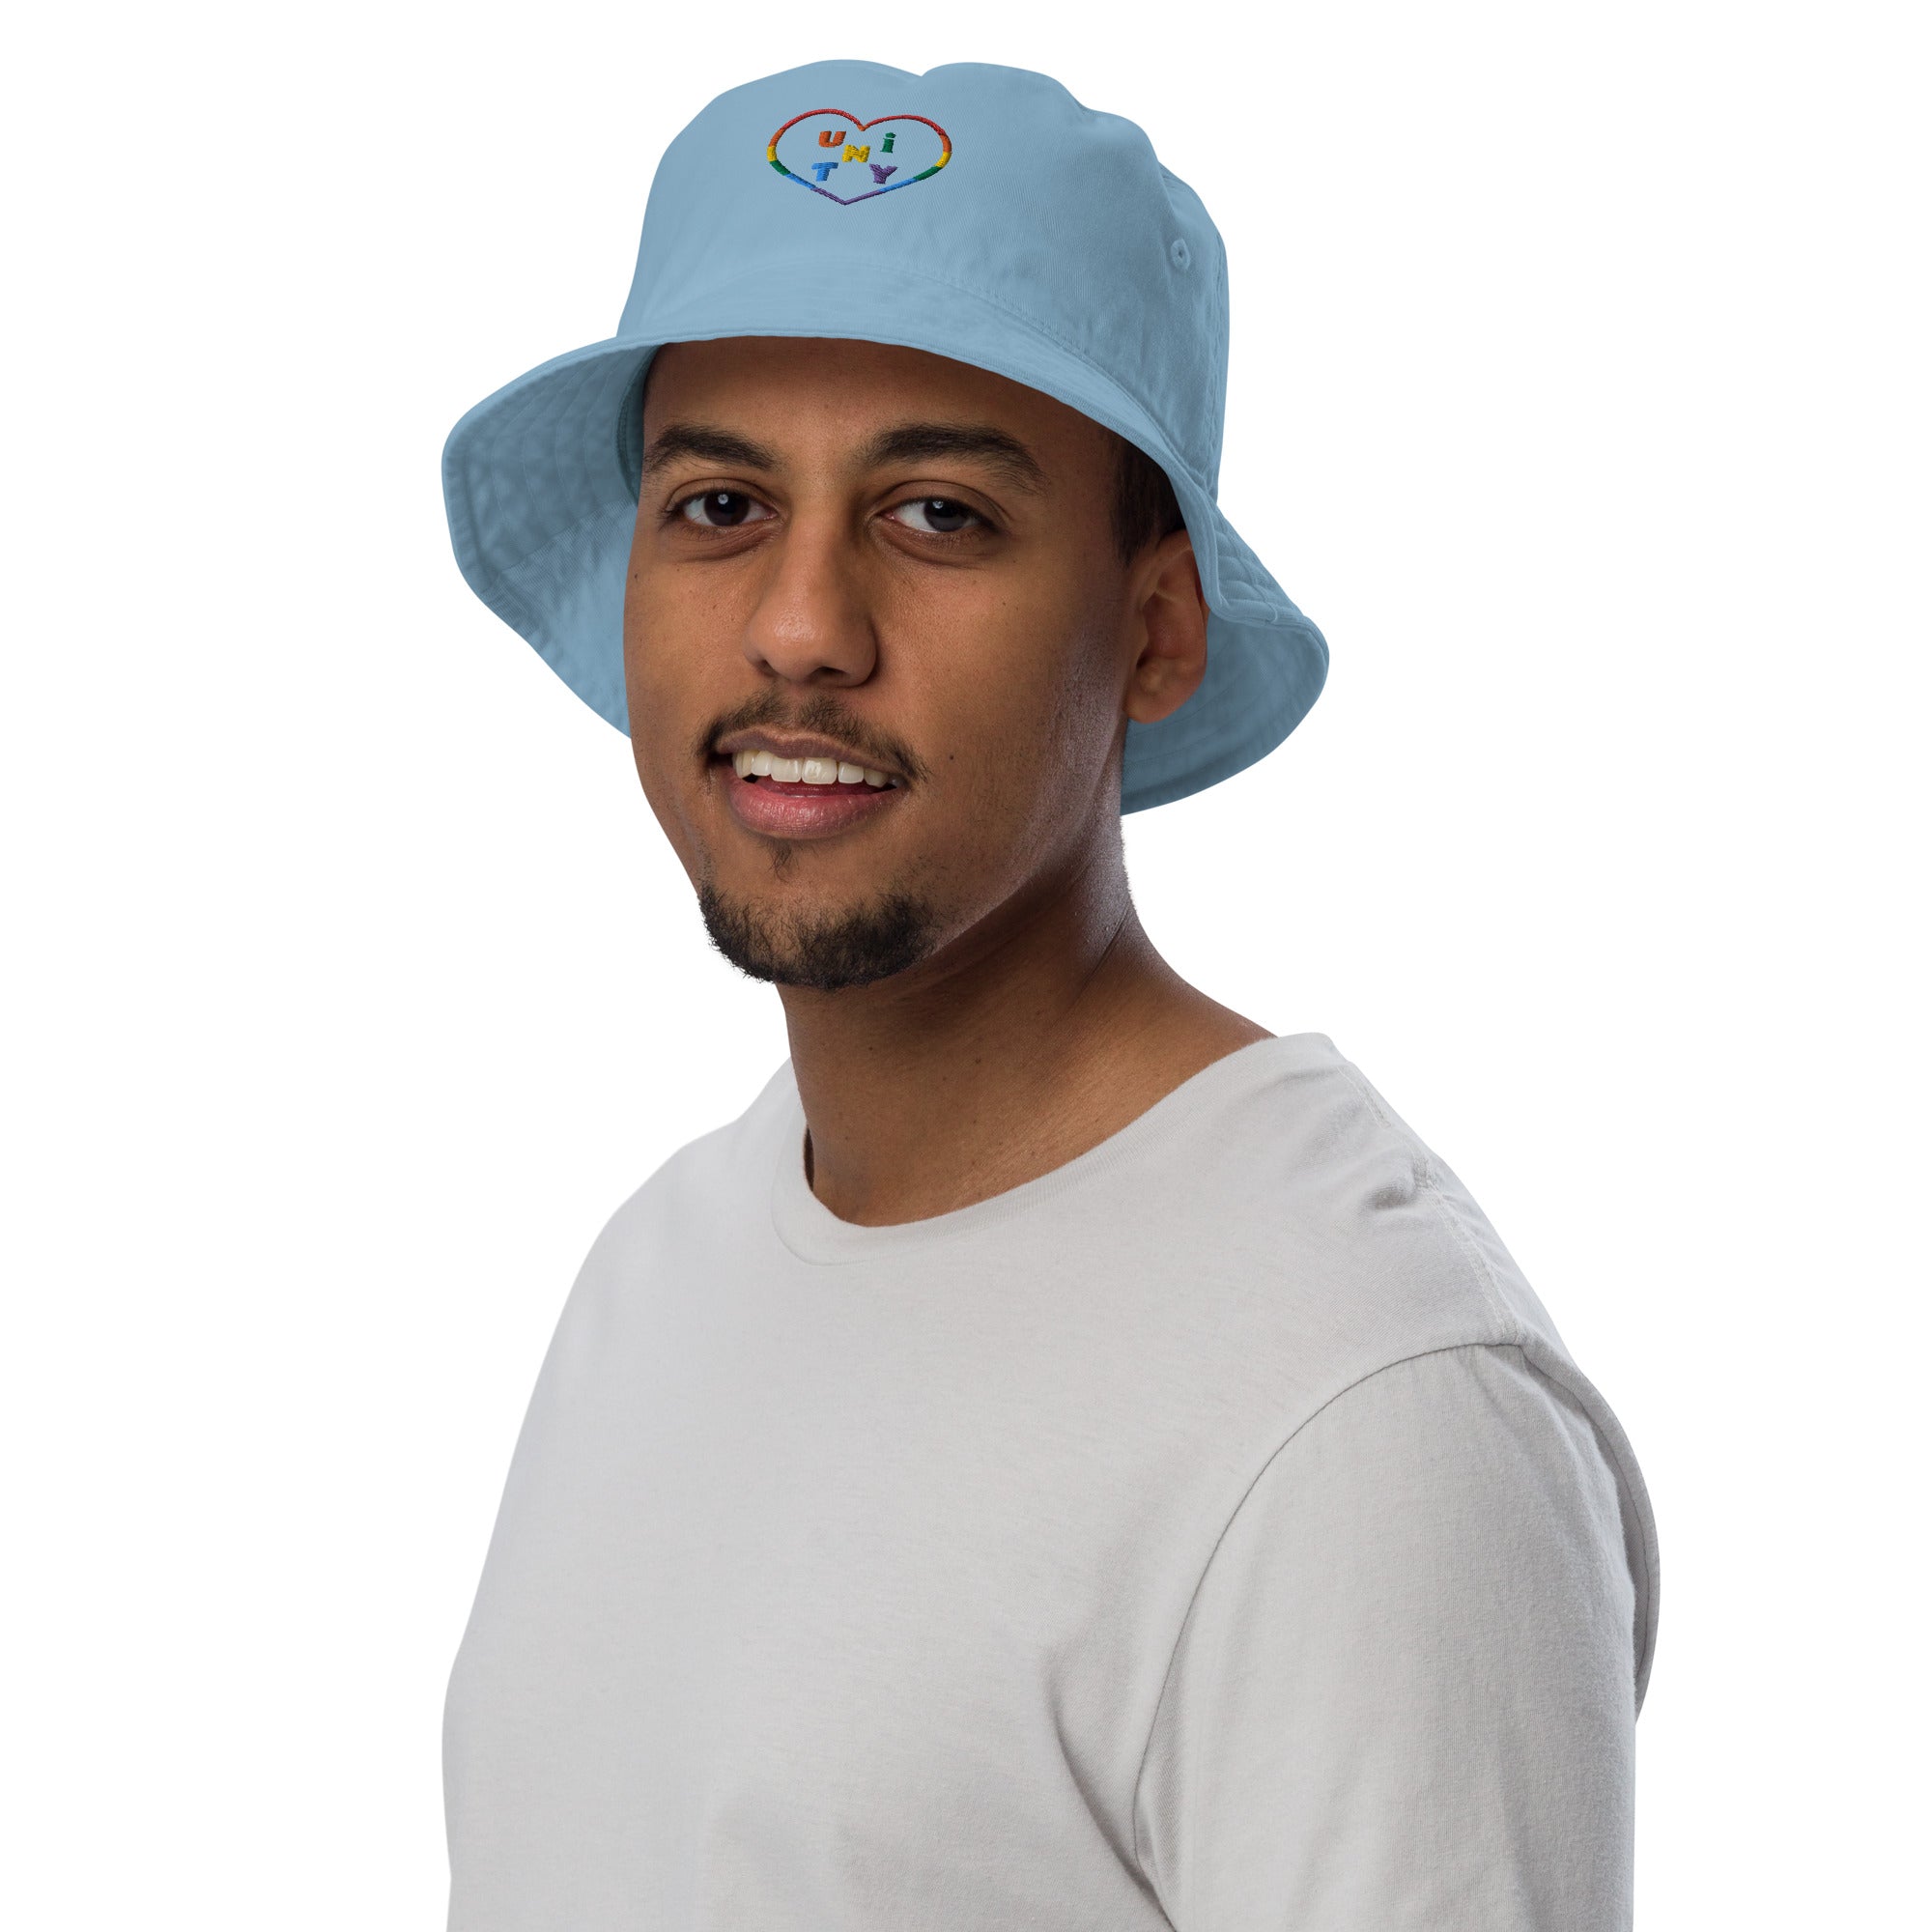 Gay Pride Unity Organic Cotton Embroidered Bucket Hat